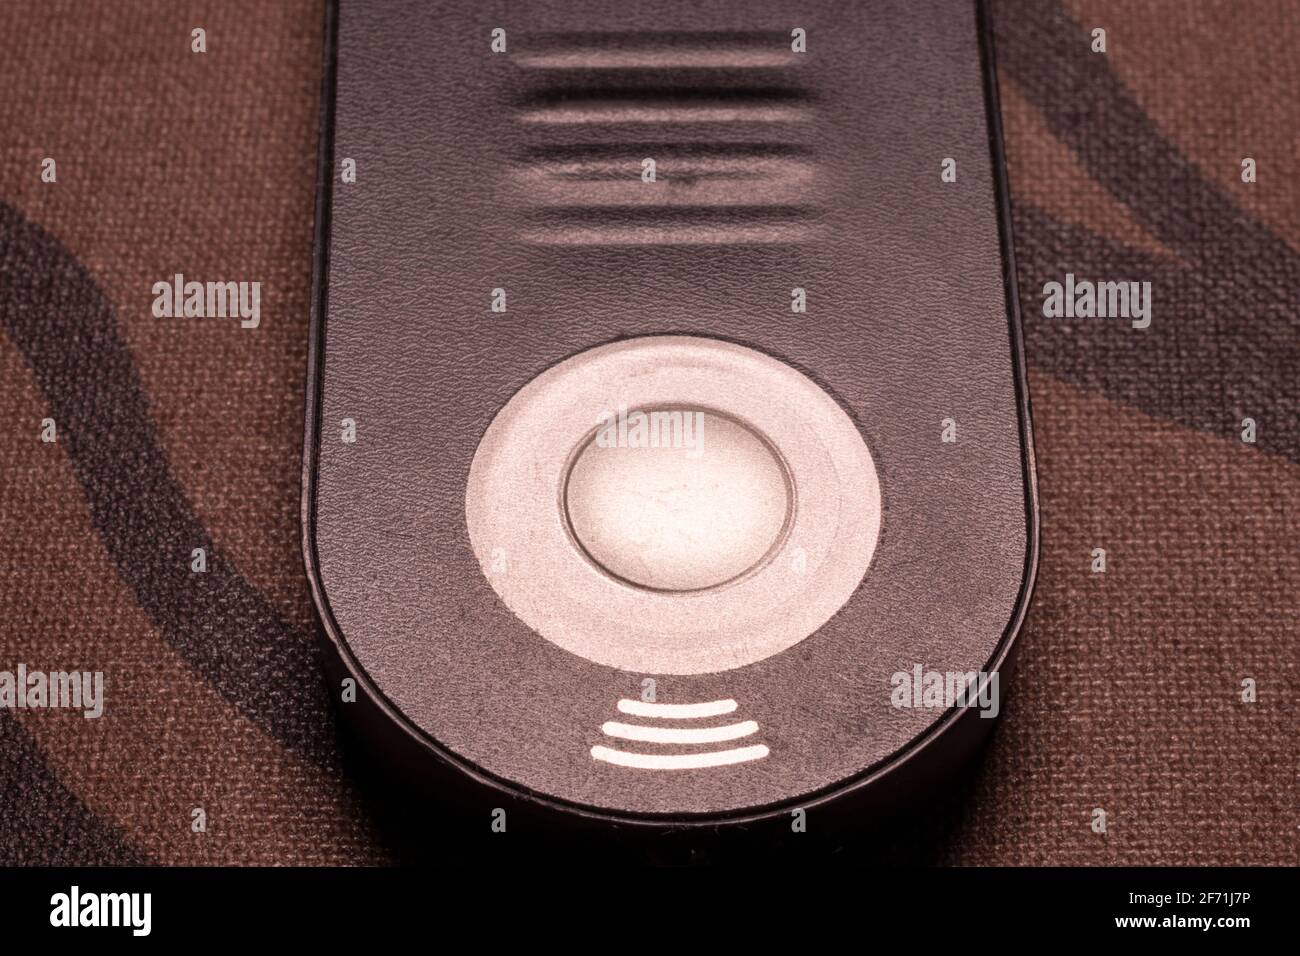 Close up of an unbranded remote control for dslr cameras Stock Photo